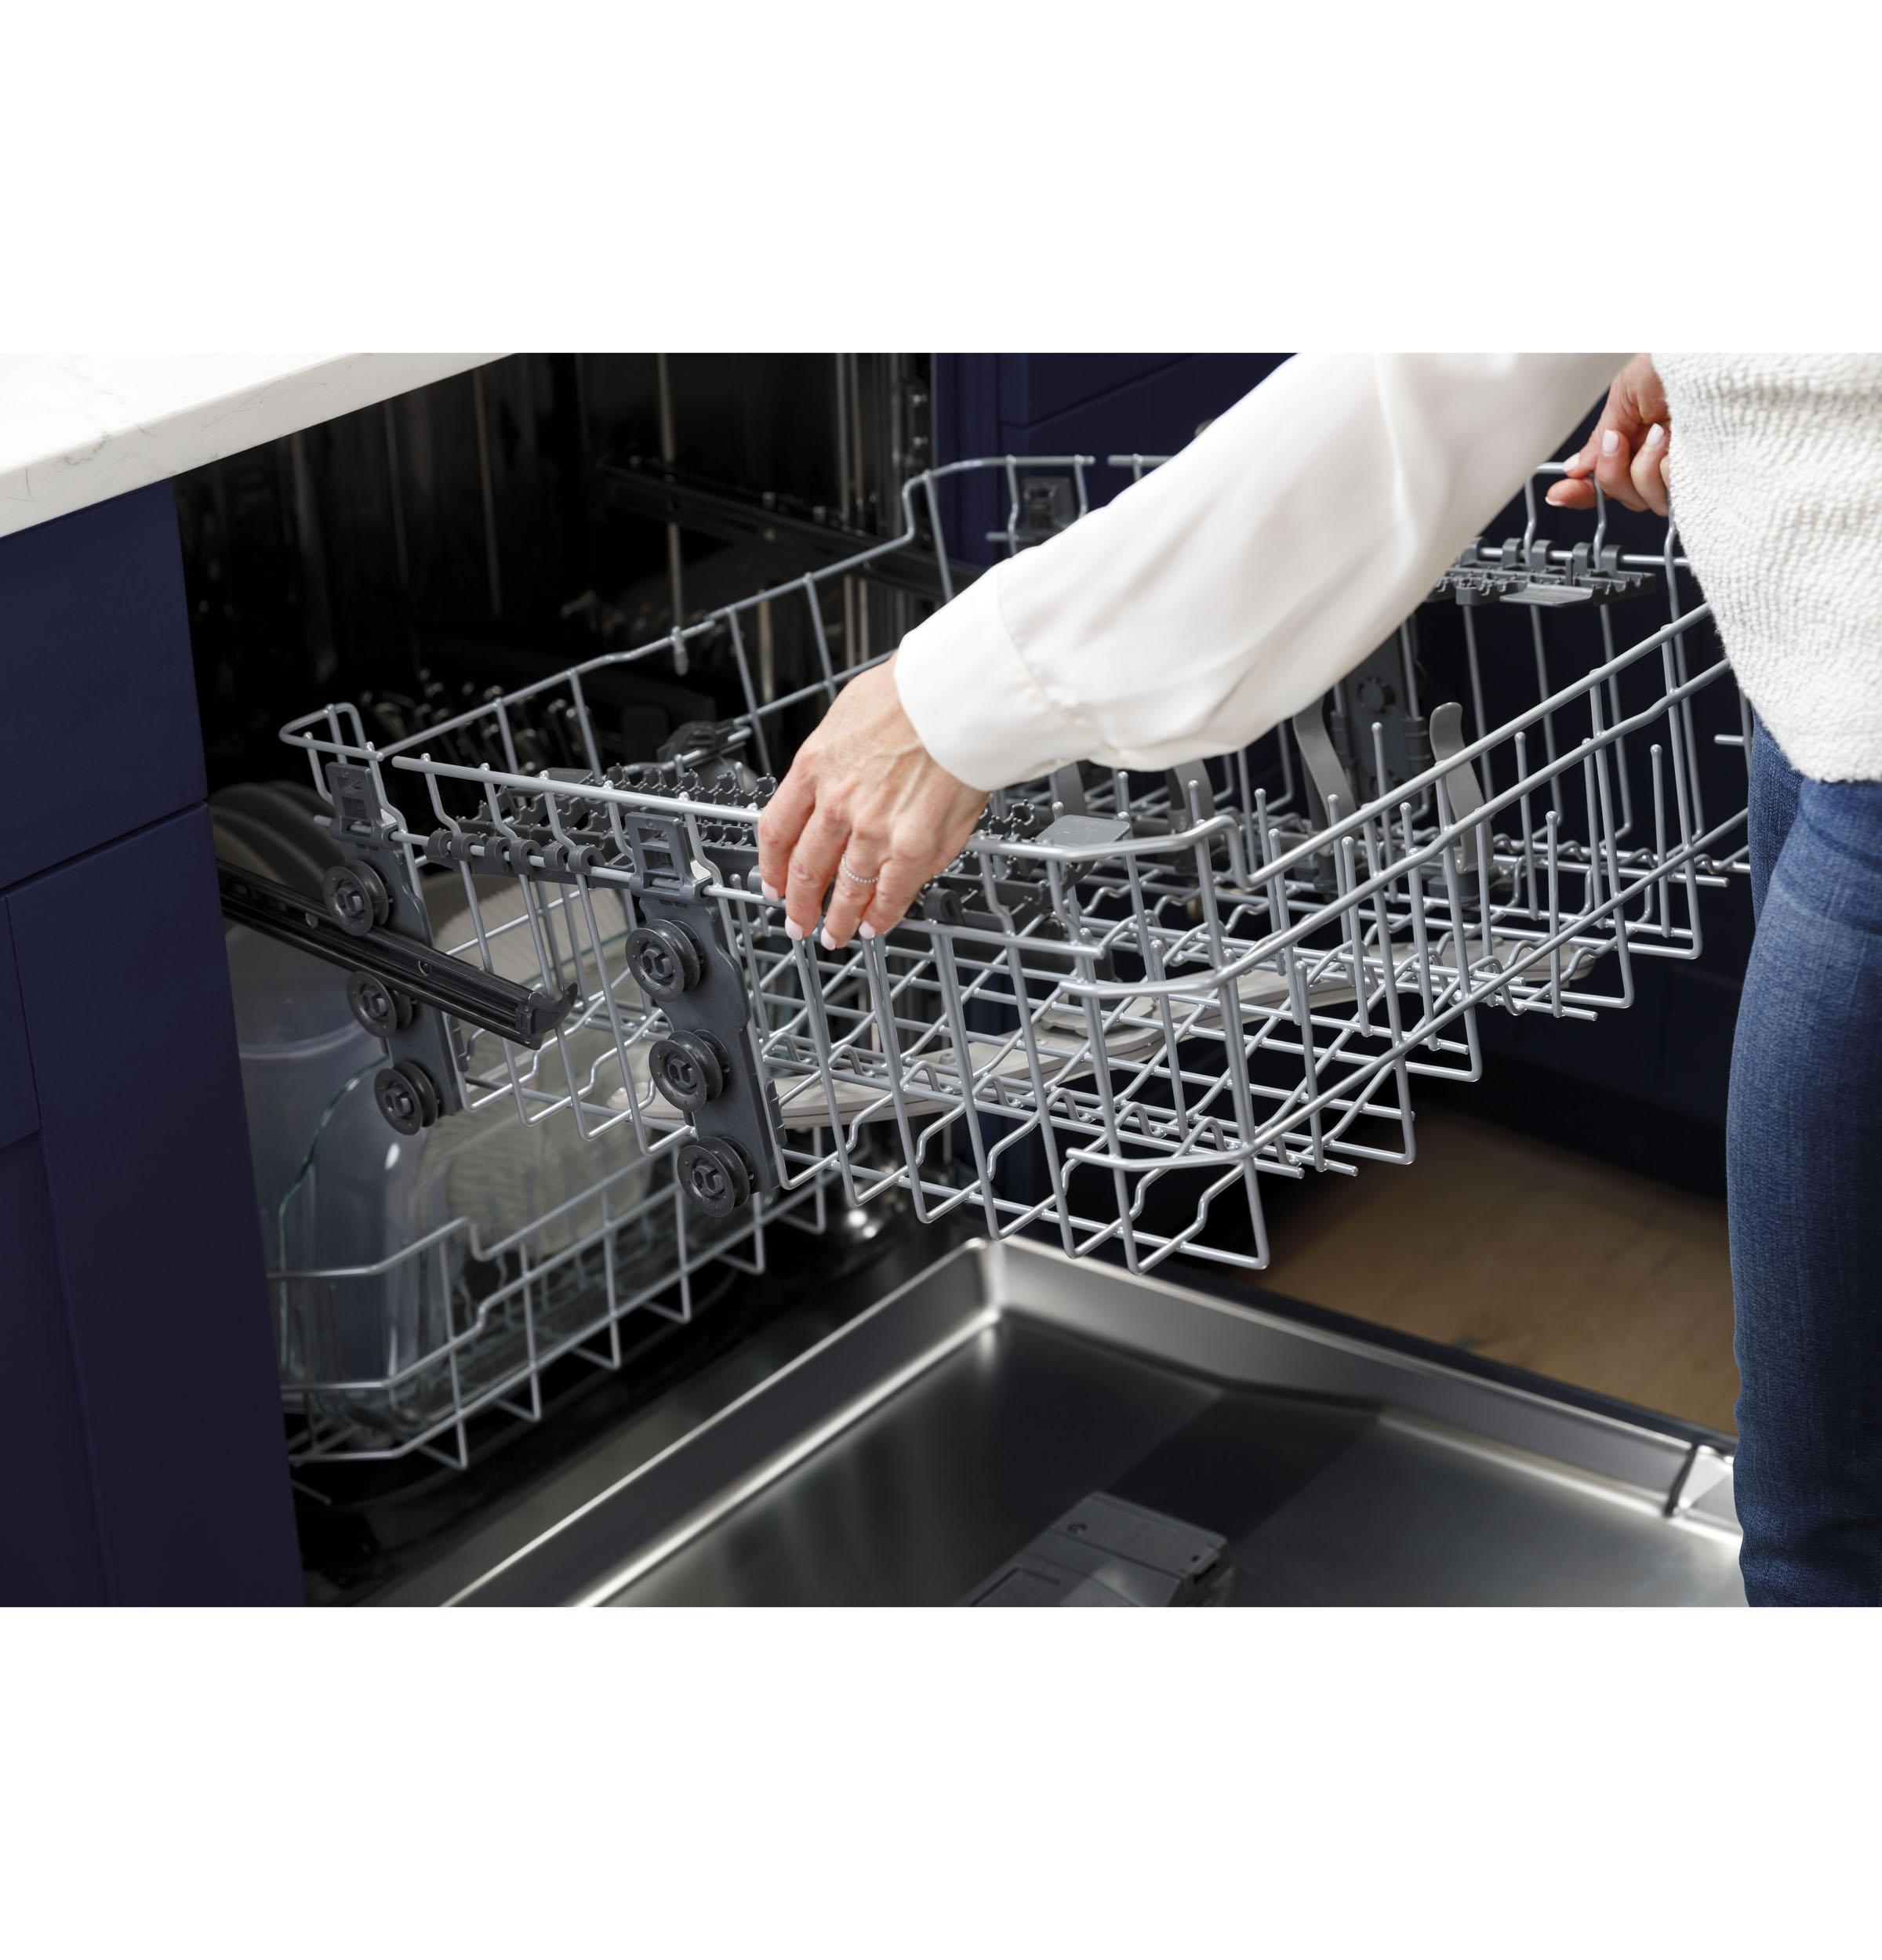 GE® Fingerprint Resistant Top Control with Stainless Steel Interior Dishwasher with Sanitize Cycle & Dry Boost with Fan Assist